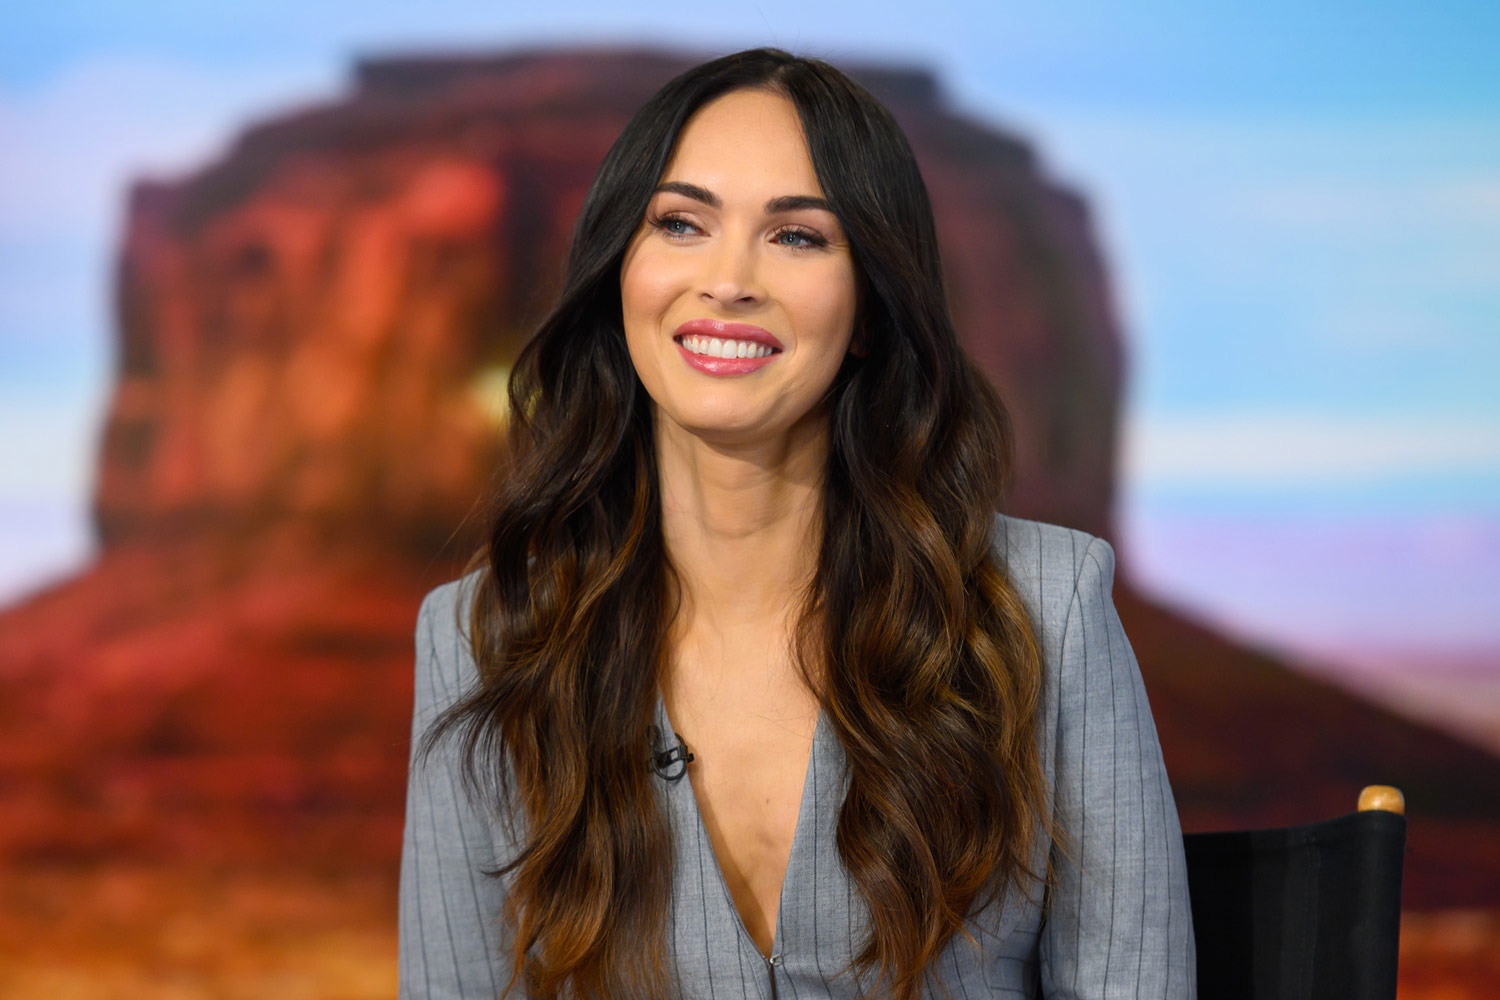 Megan Fox Shares Rare Family Photos Of Her Three Sons And Husband